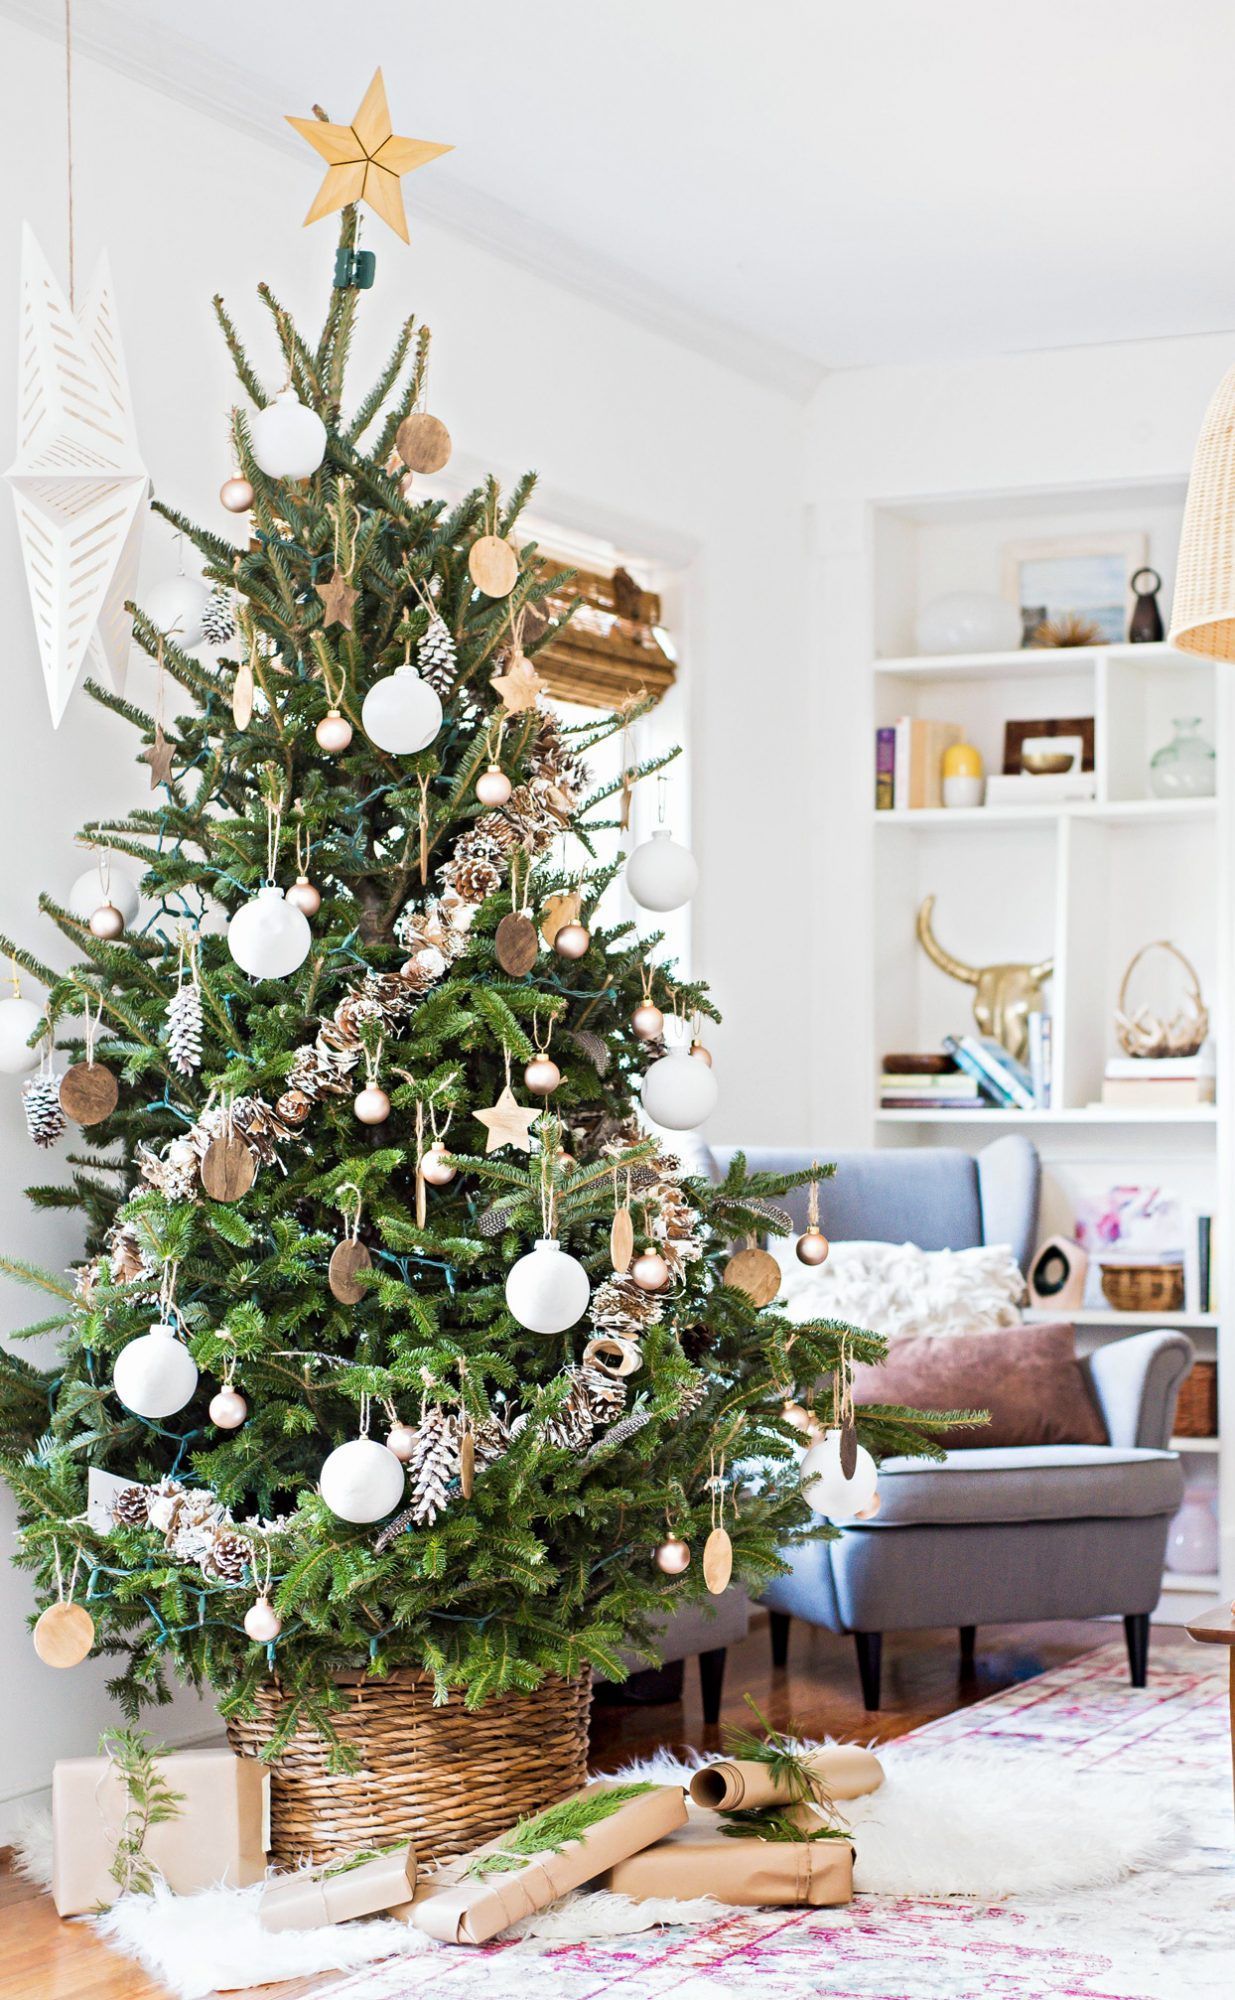 The 7 Christmas Trends That Will be Huge This Year - The 7 Christmas Trends That Will be Huge This Year -   19 christmas tree decorations 2020 trends ideas